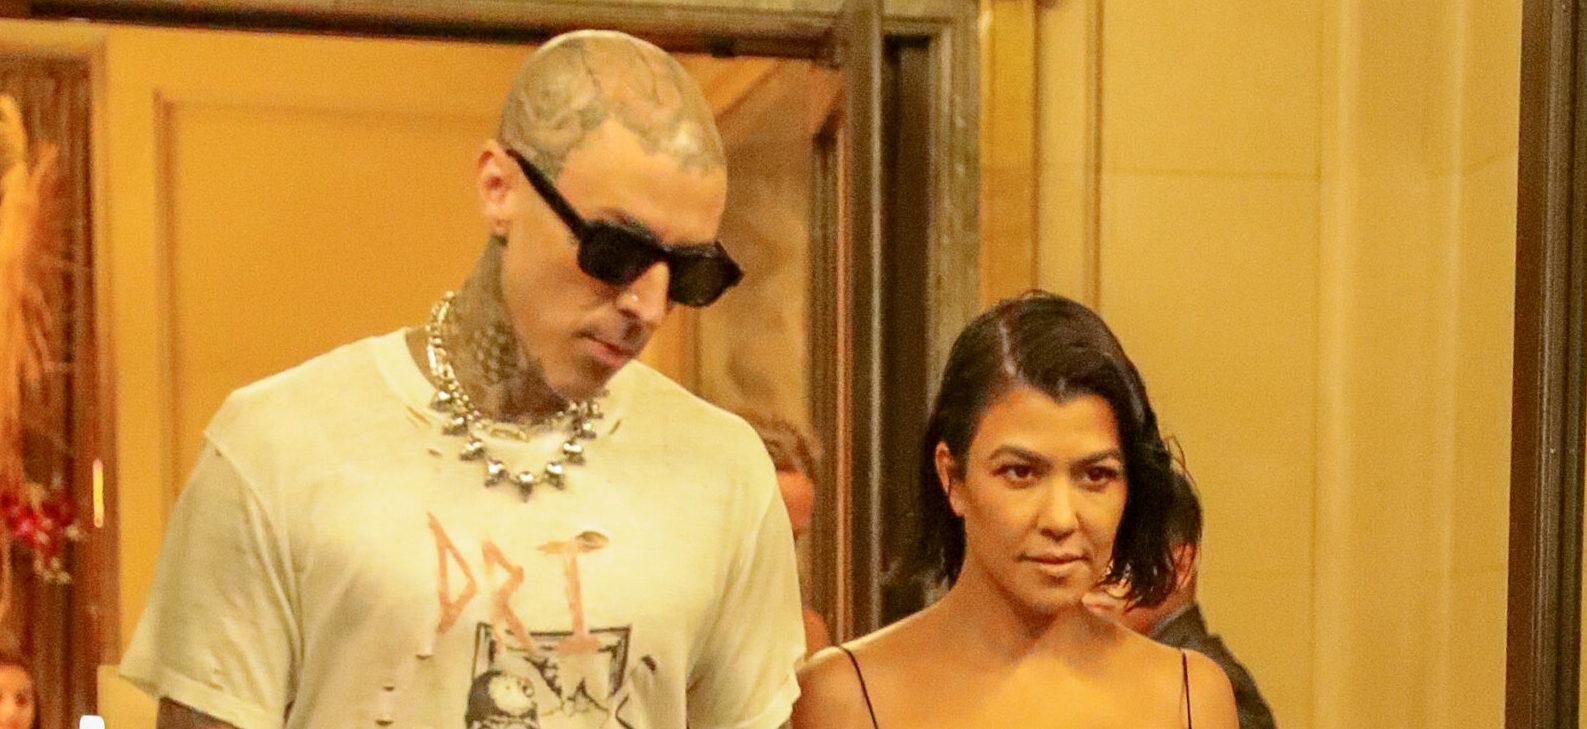 Kourtney Kardashian and Travis Barker are seen leaving the Ritz Hotel in NYC on Sep 11 2021